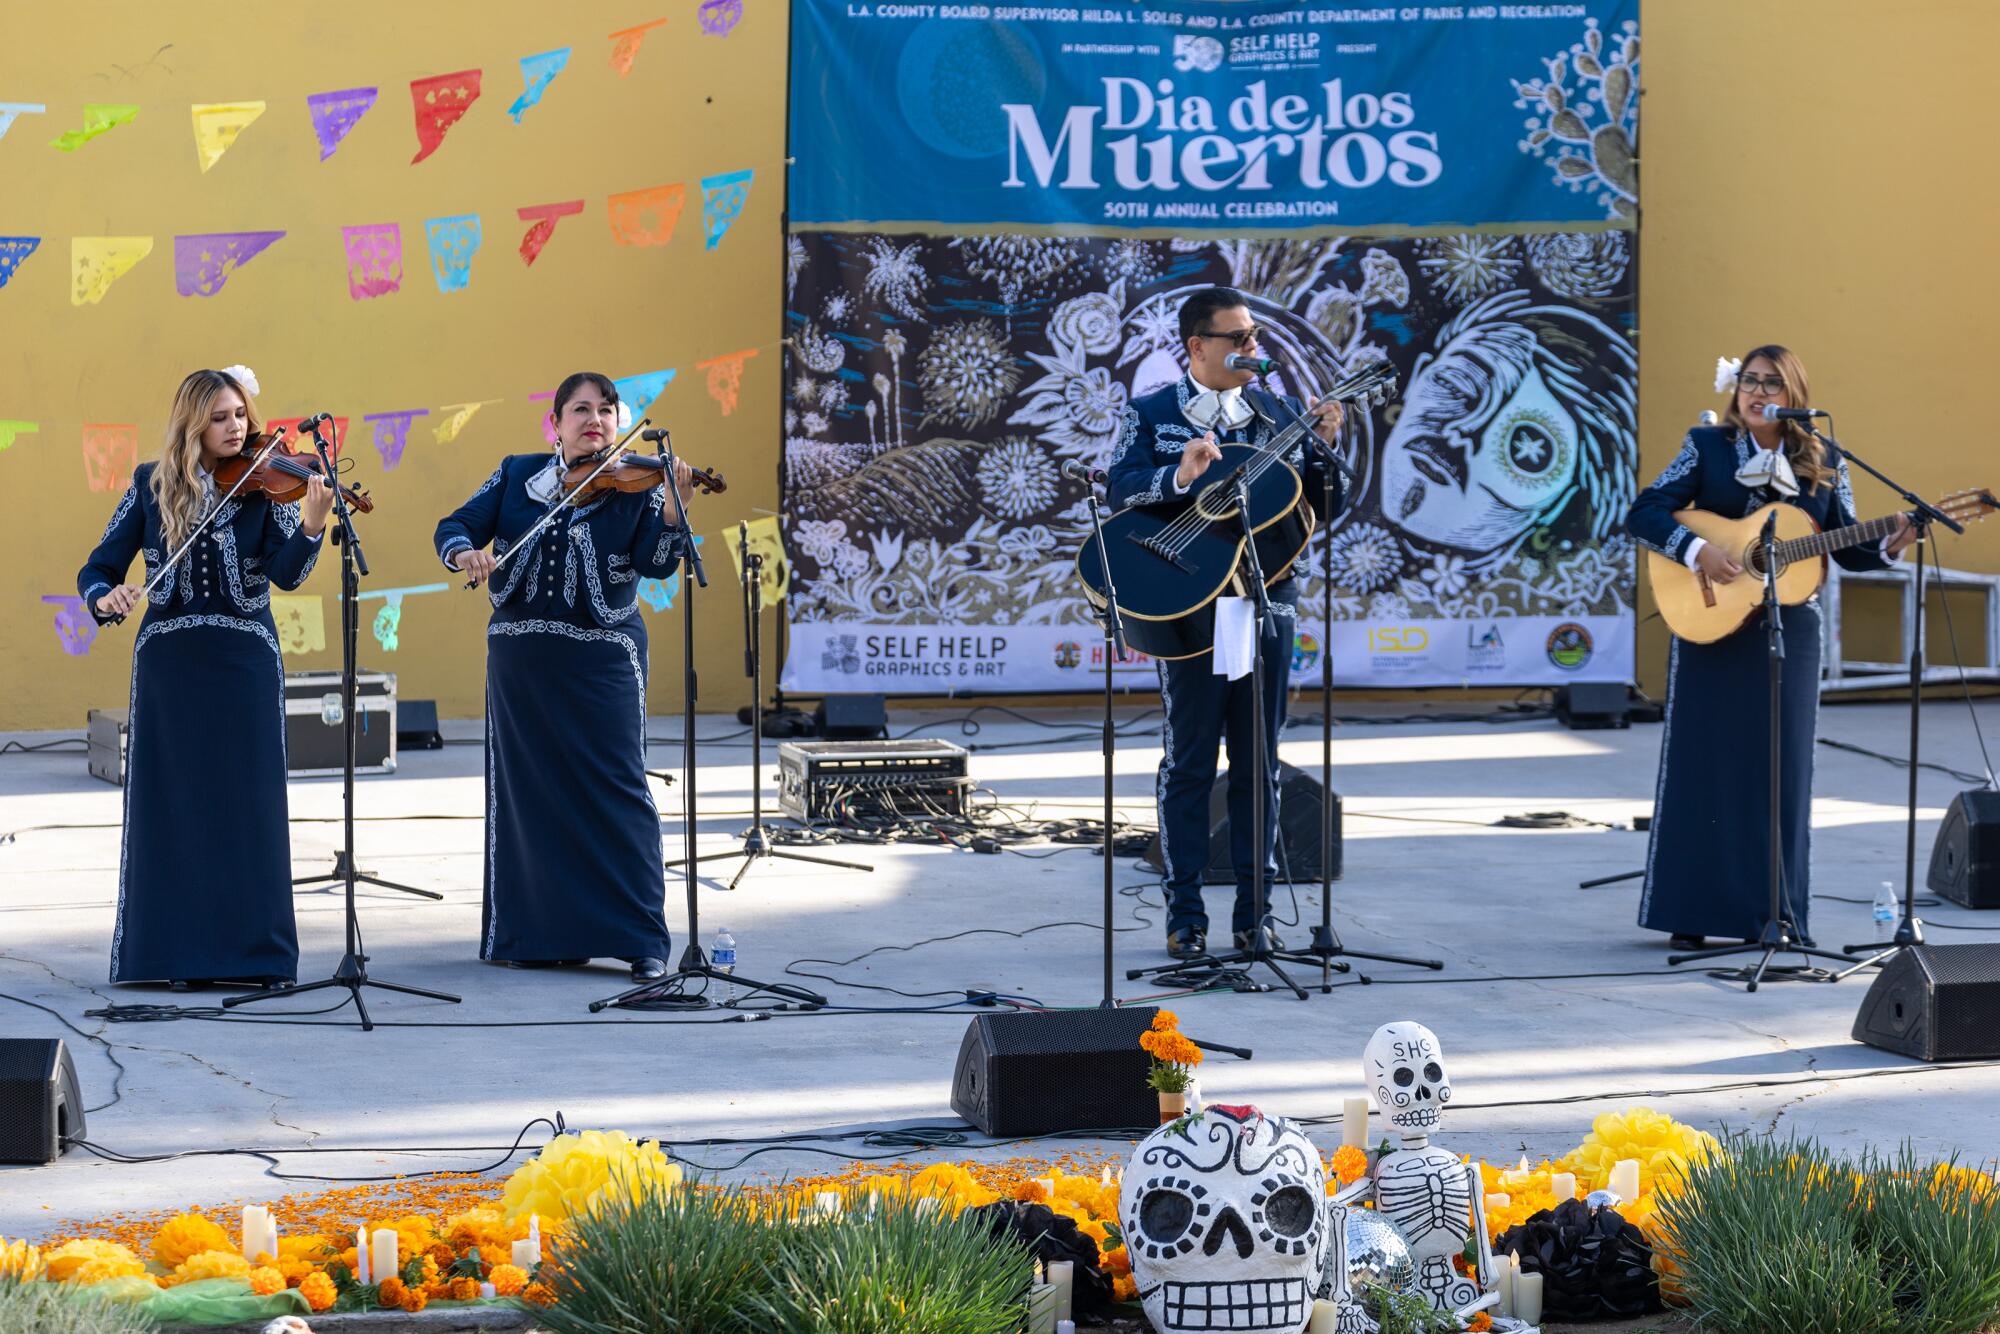 A mariachi band performs onstage. A banner behind them reads "Dia de los Muertos"